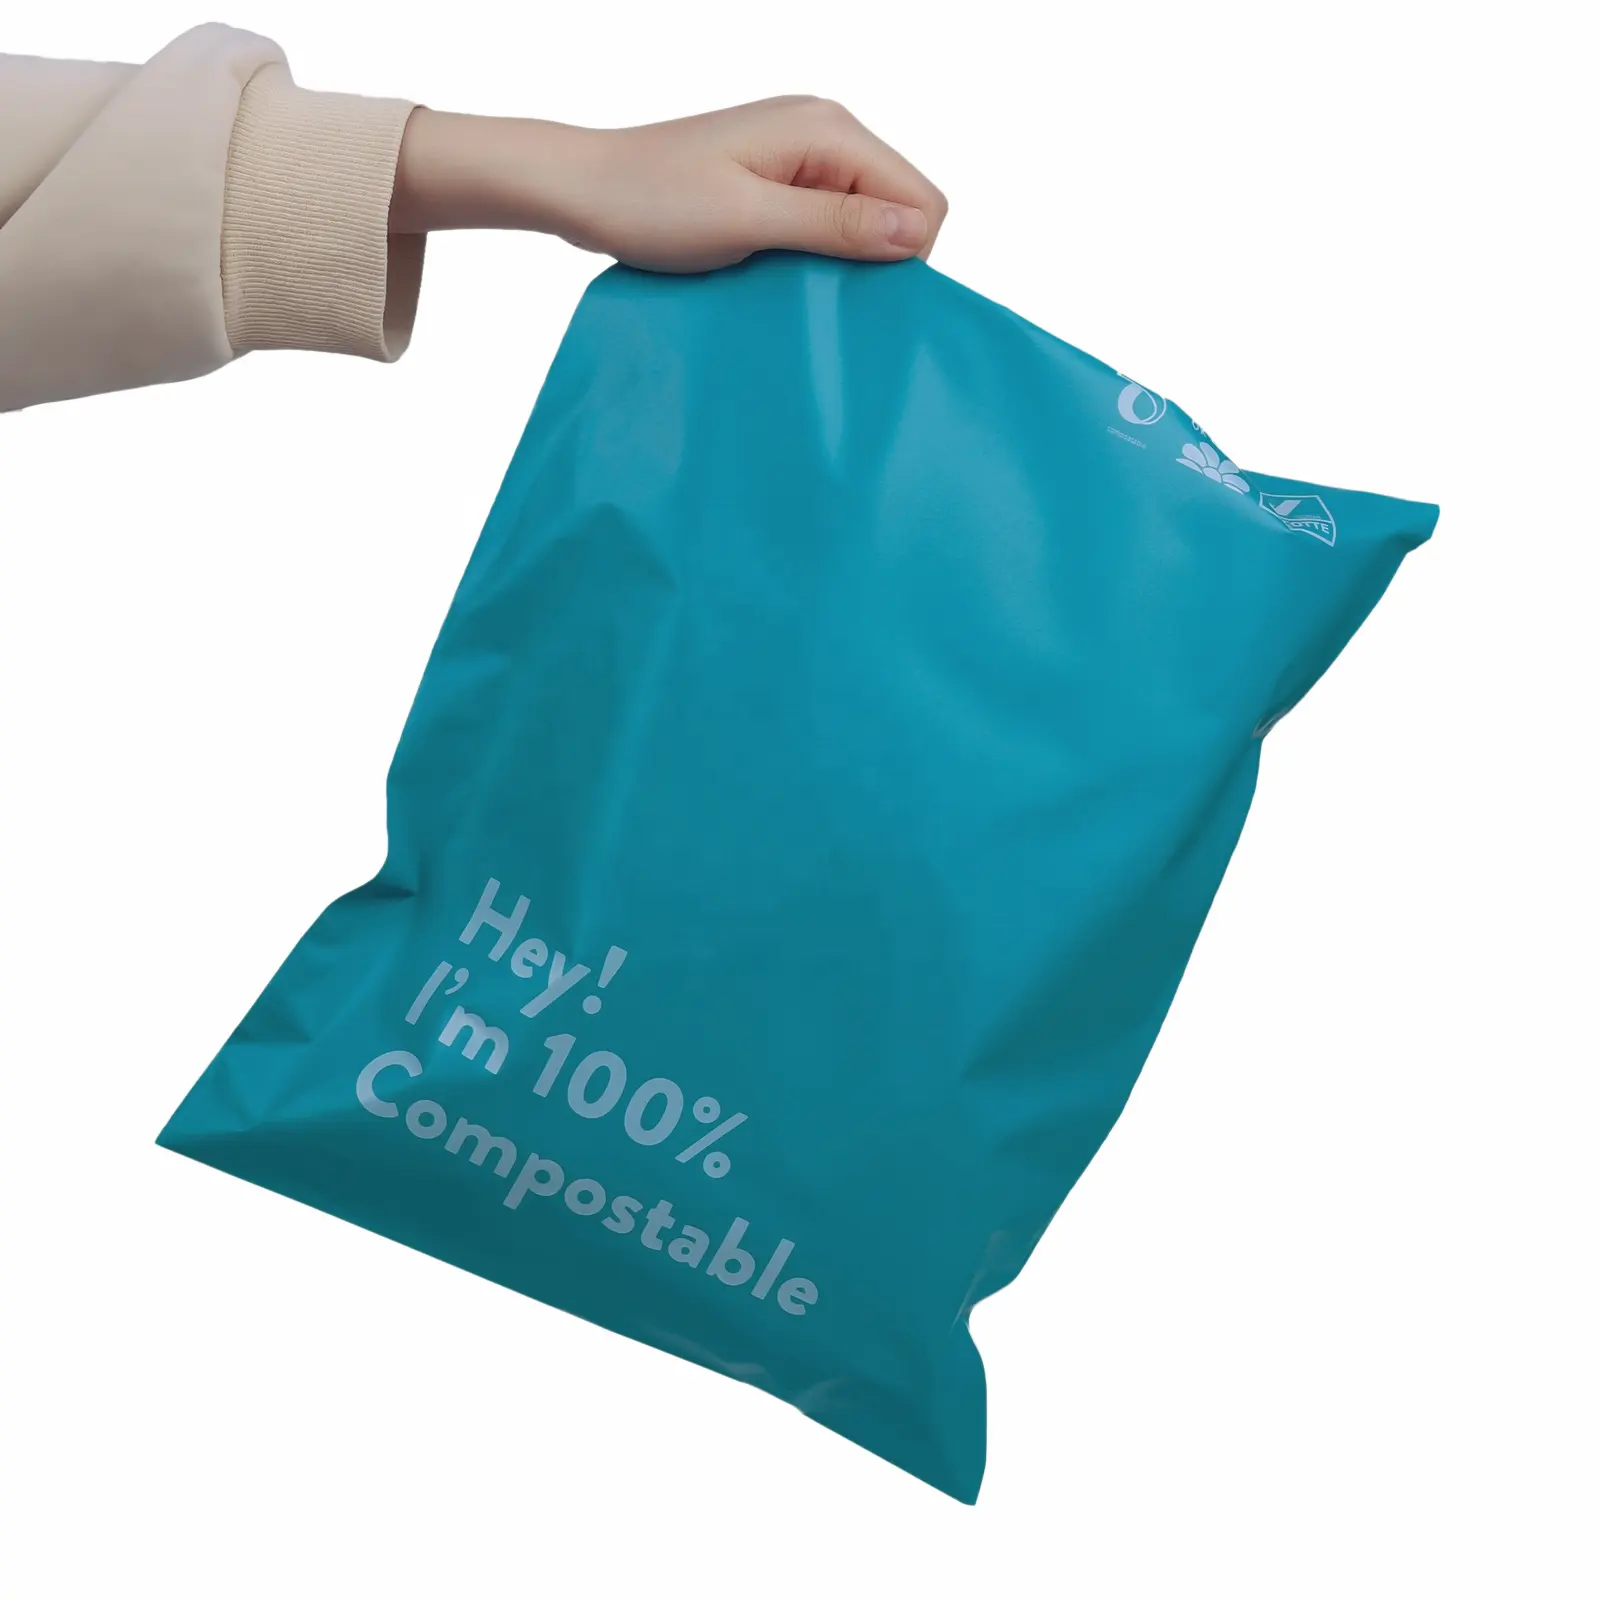 Biodegradable Clothes Mailing Ecology Teal Self-Adhesive Light Green Compostable Postage Bags